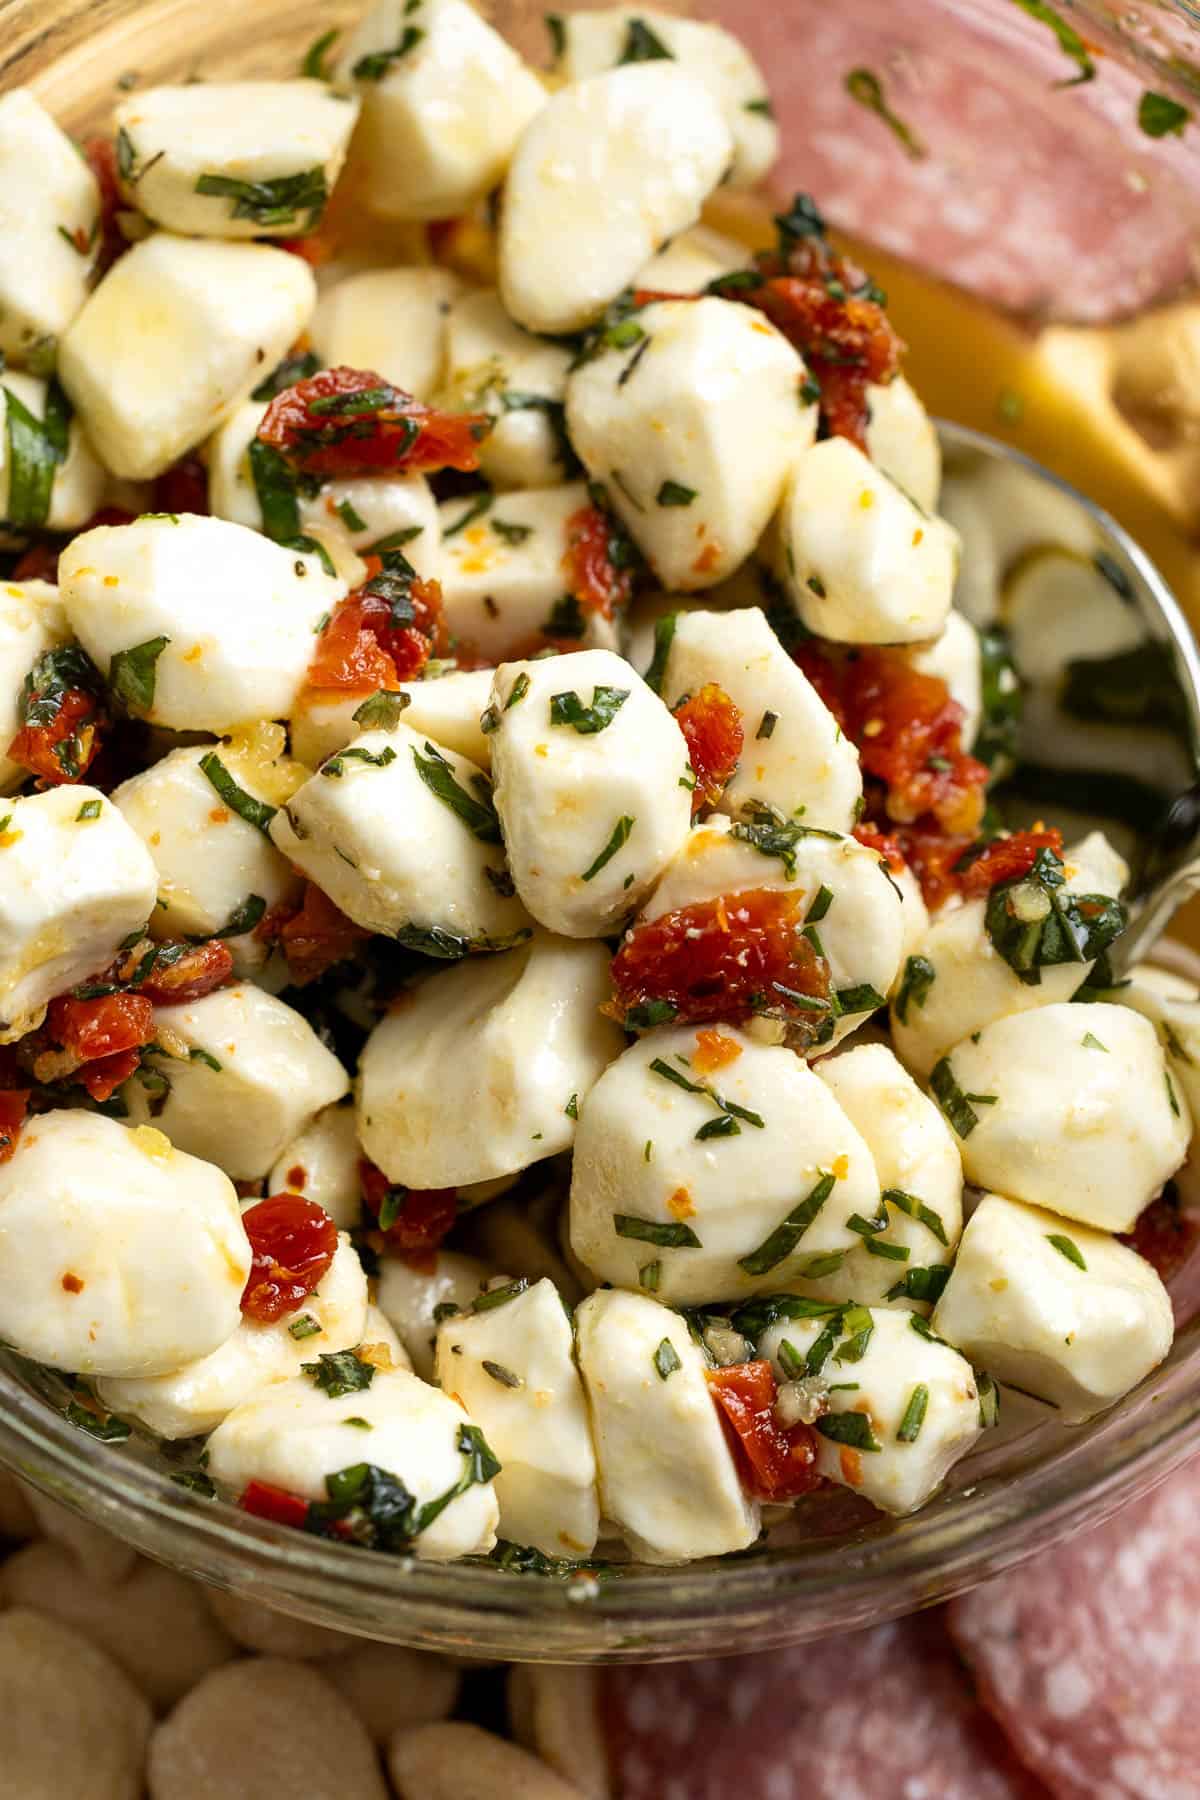 Fresh mozzarella balls coated in olive oil, herbs, sun-dried tomatoes, and seasonings.